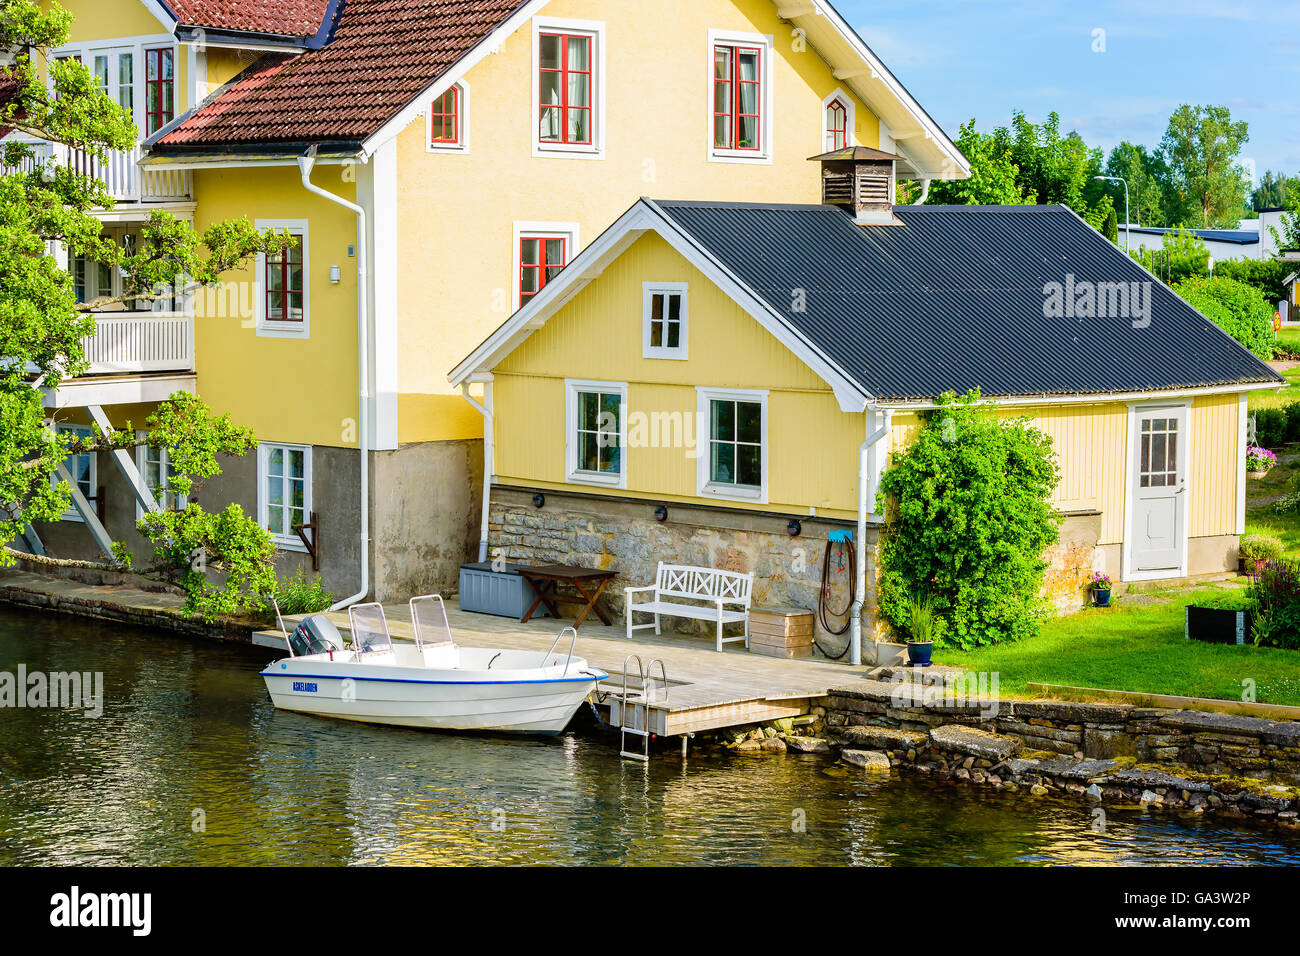 Borensberg, Sweden - June 20, 2016: Smaller house next to larger house. Jetty and a boat moored in front of the smaller house. B Stock Photo